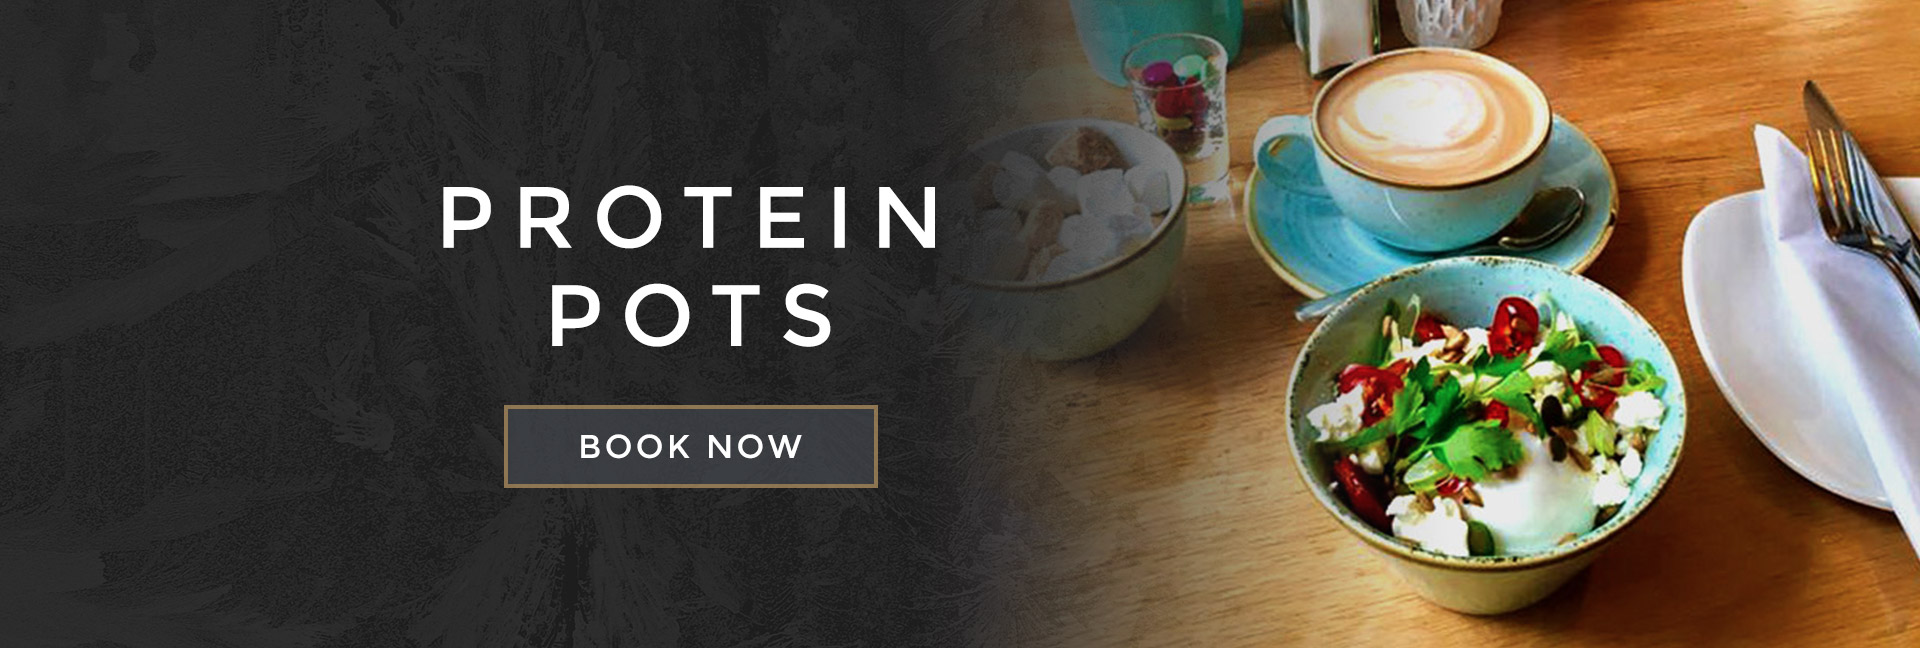 Protein pots at All Bar One Sutton - Book your table